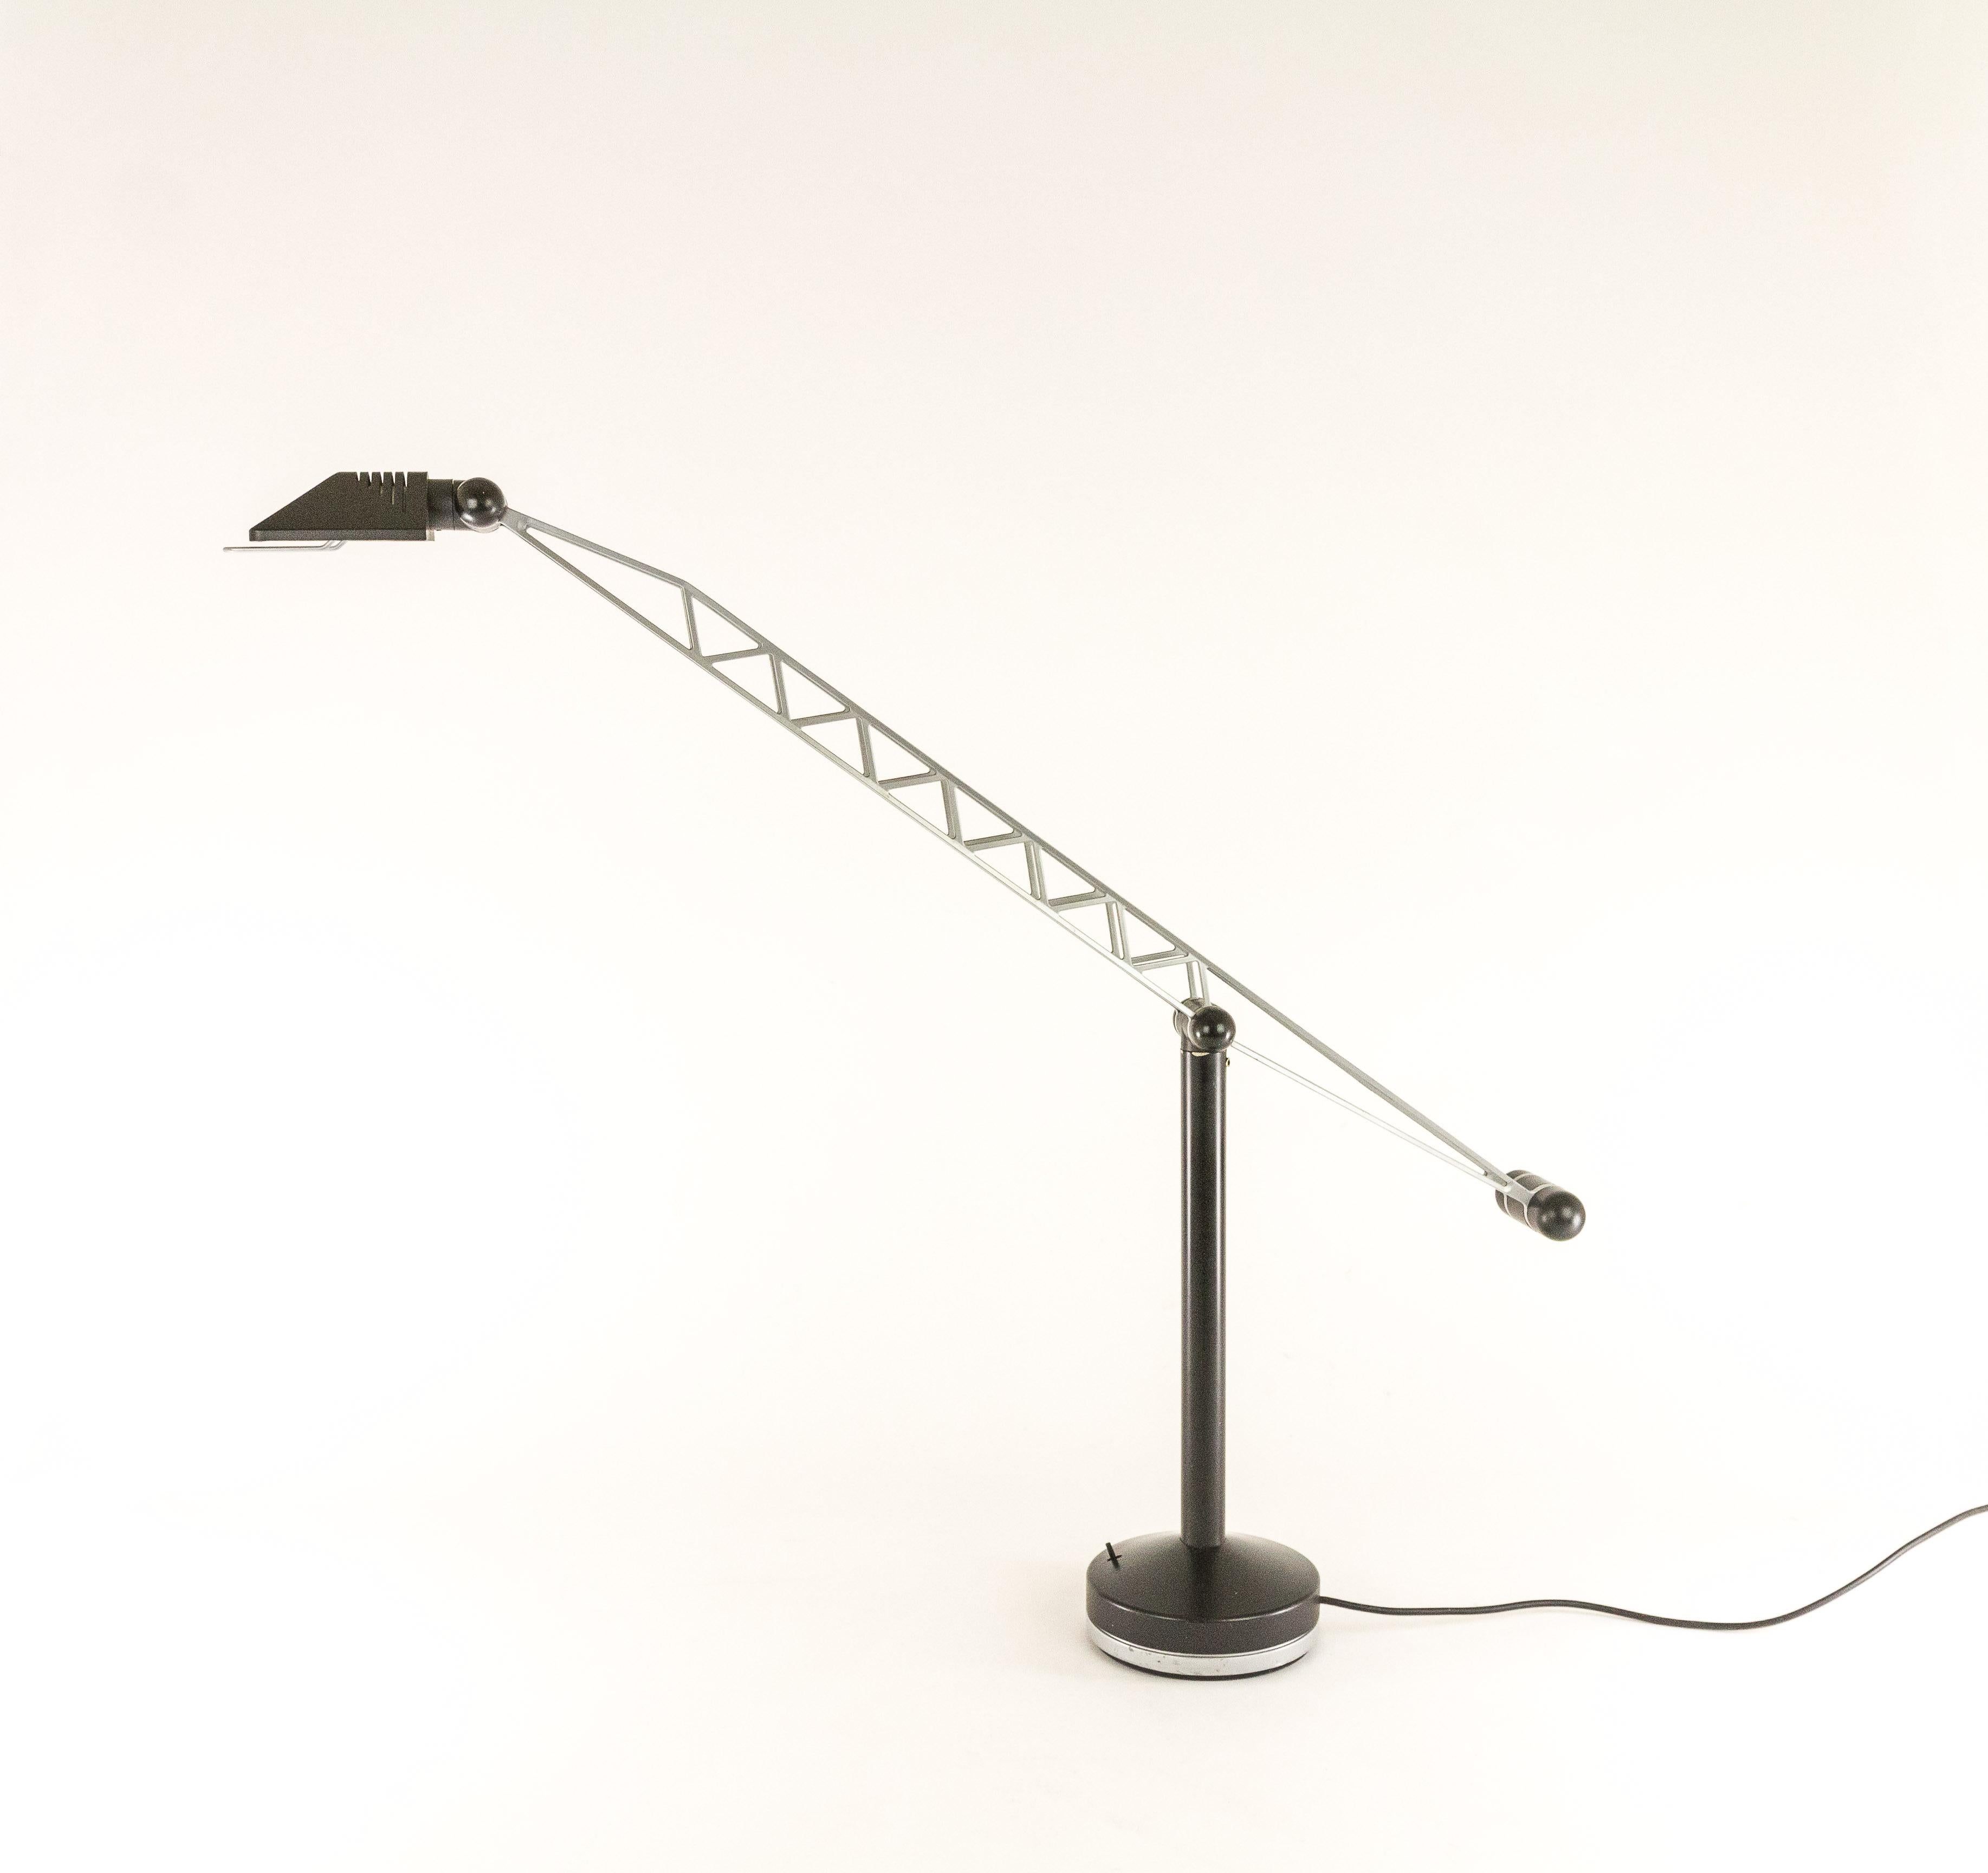 Leader, a halogen table lamp designed by Raul Barbieri and Giorgio Marianelli for Tronconi from Milan, Italy.

The lamps was designed in the mid-1980s. It is adjustable in all directions and relatively big for a table lamp.

The condition of the